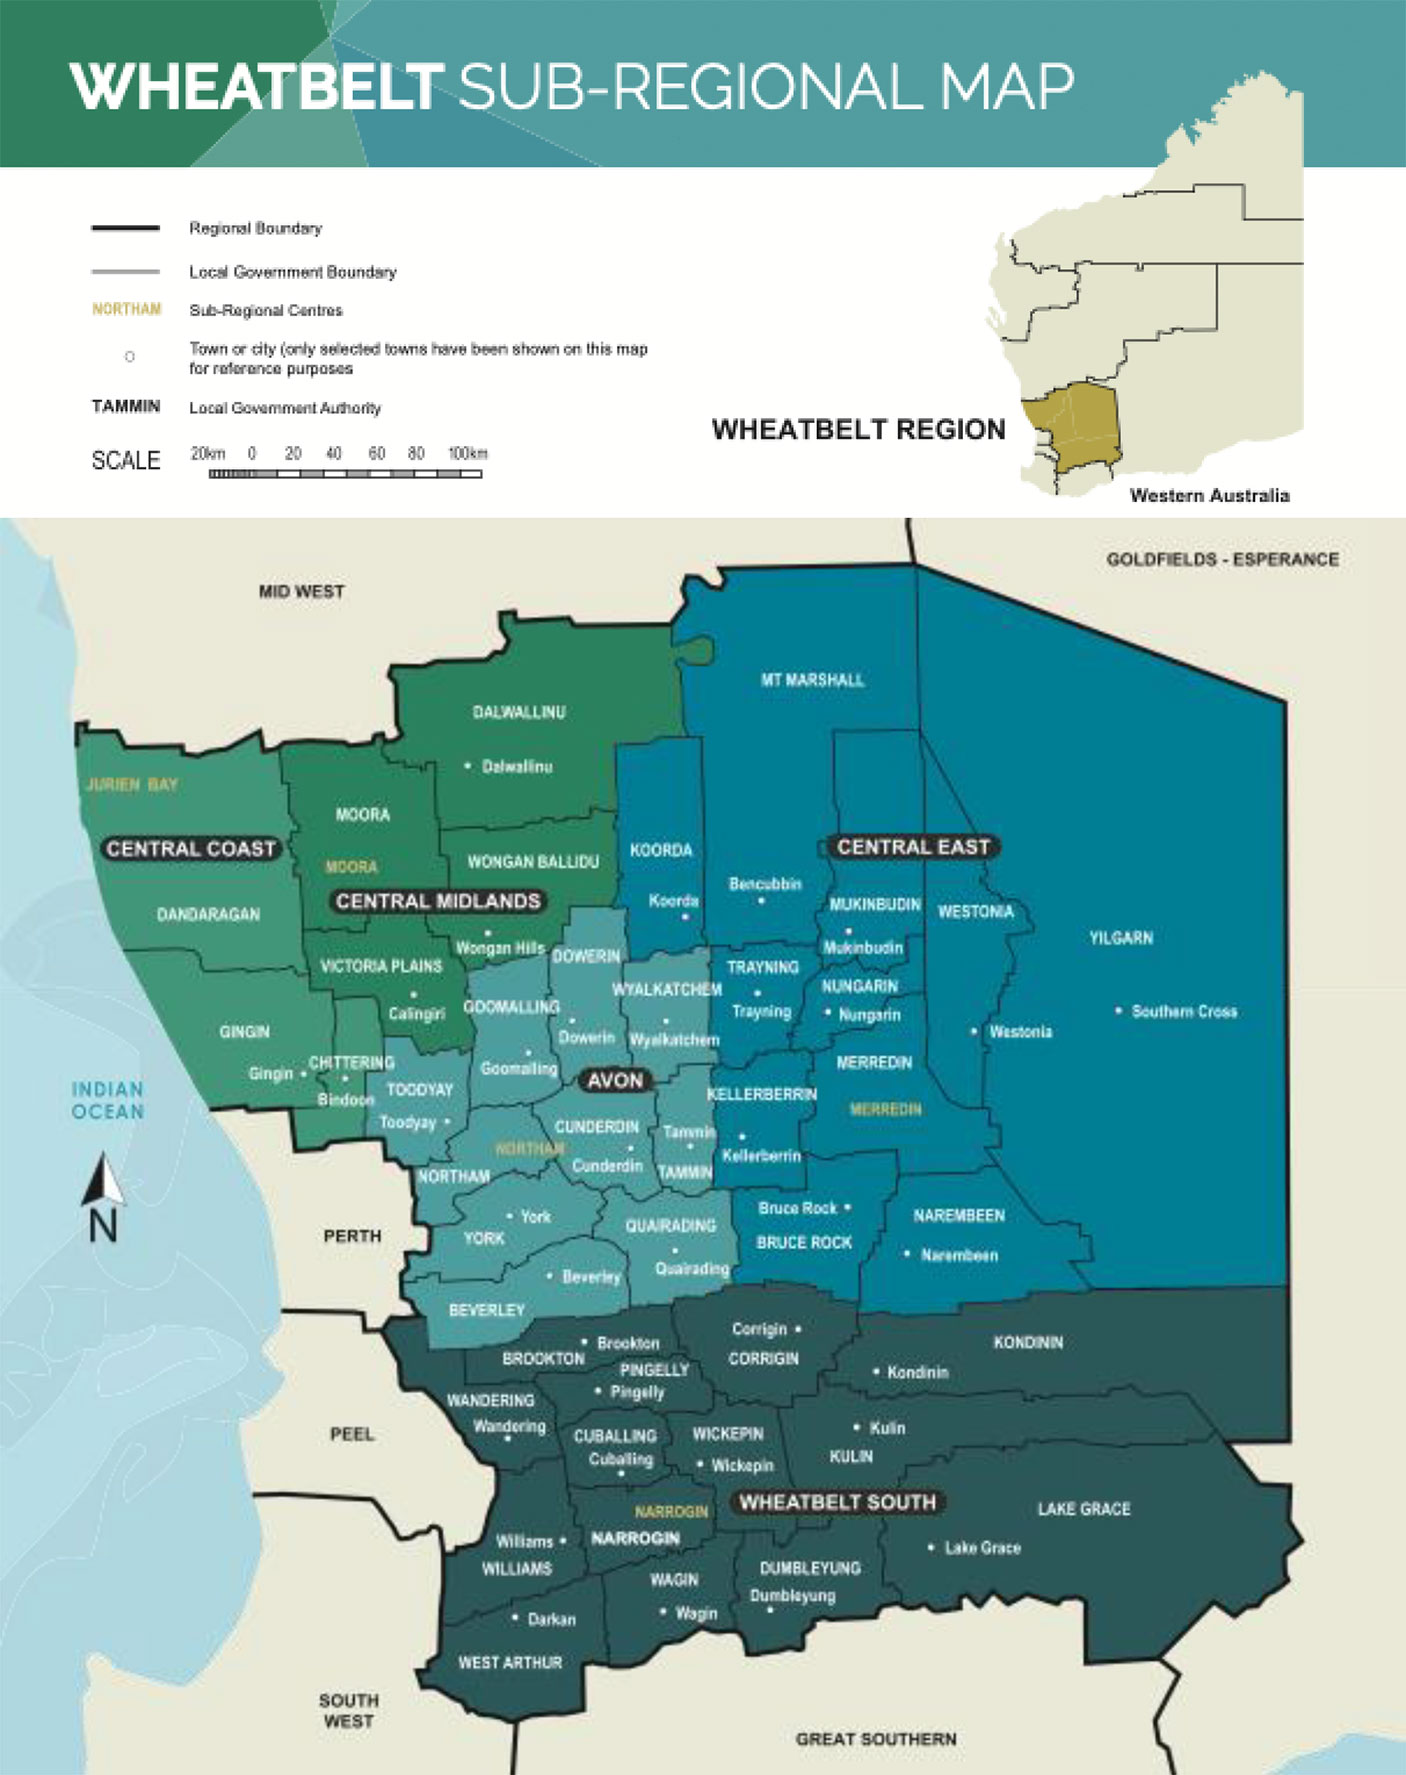 A map of the Wheatbelt region of WA showing all local government areas and major towns.